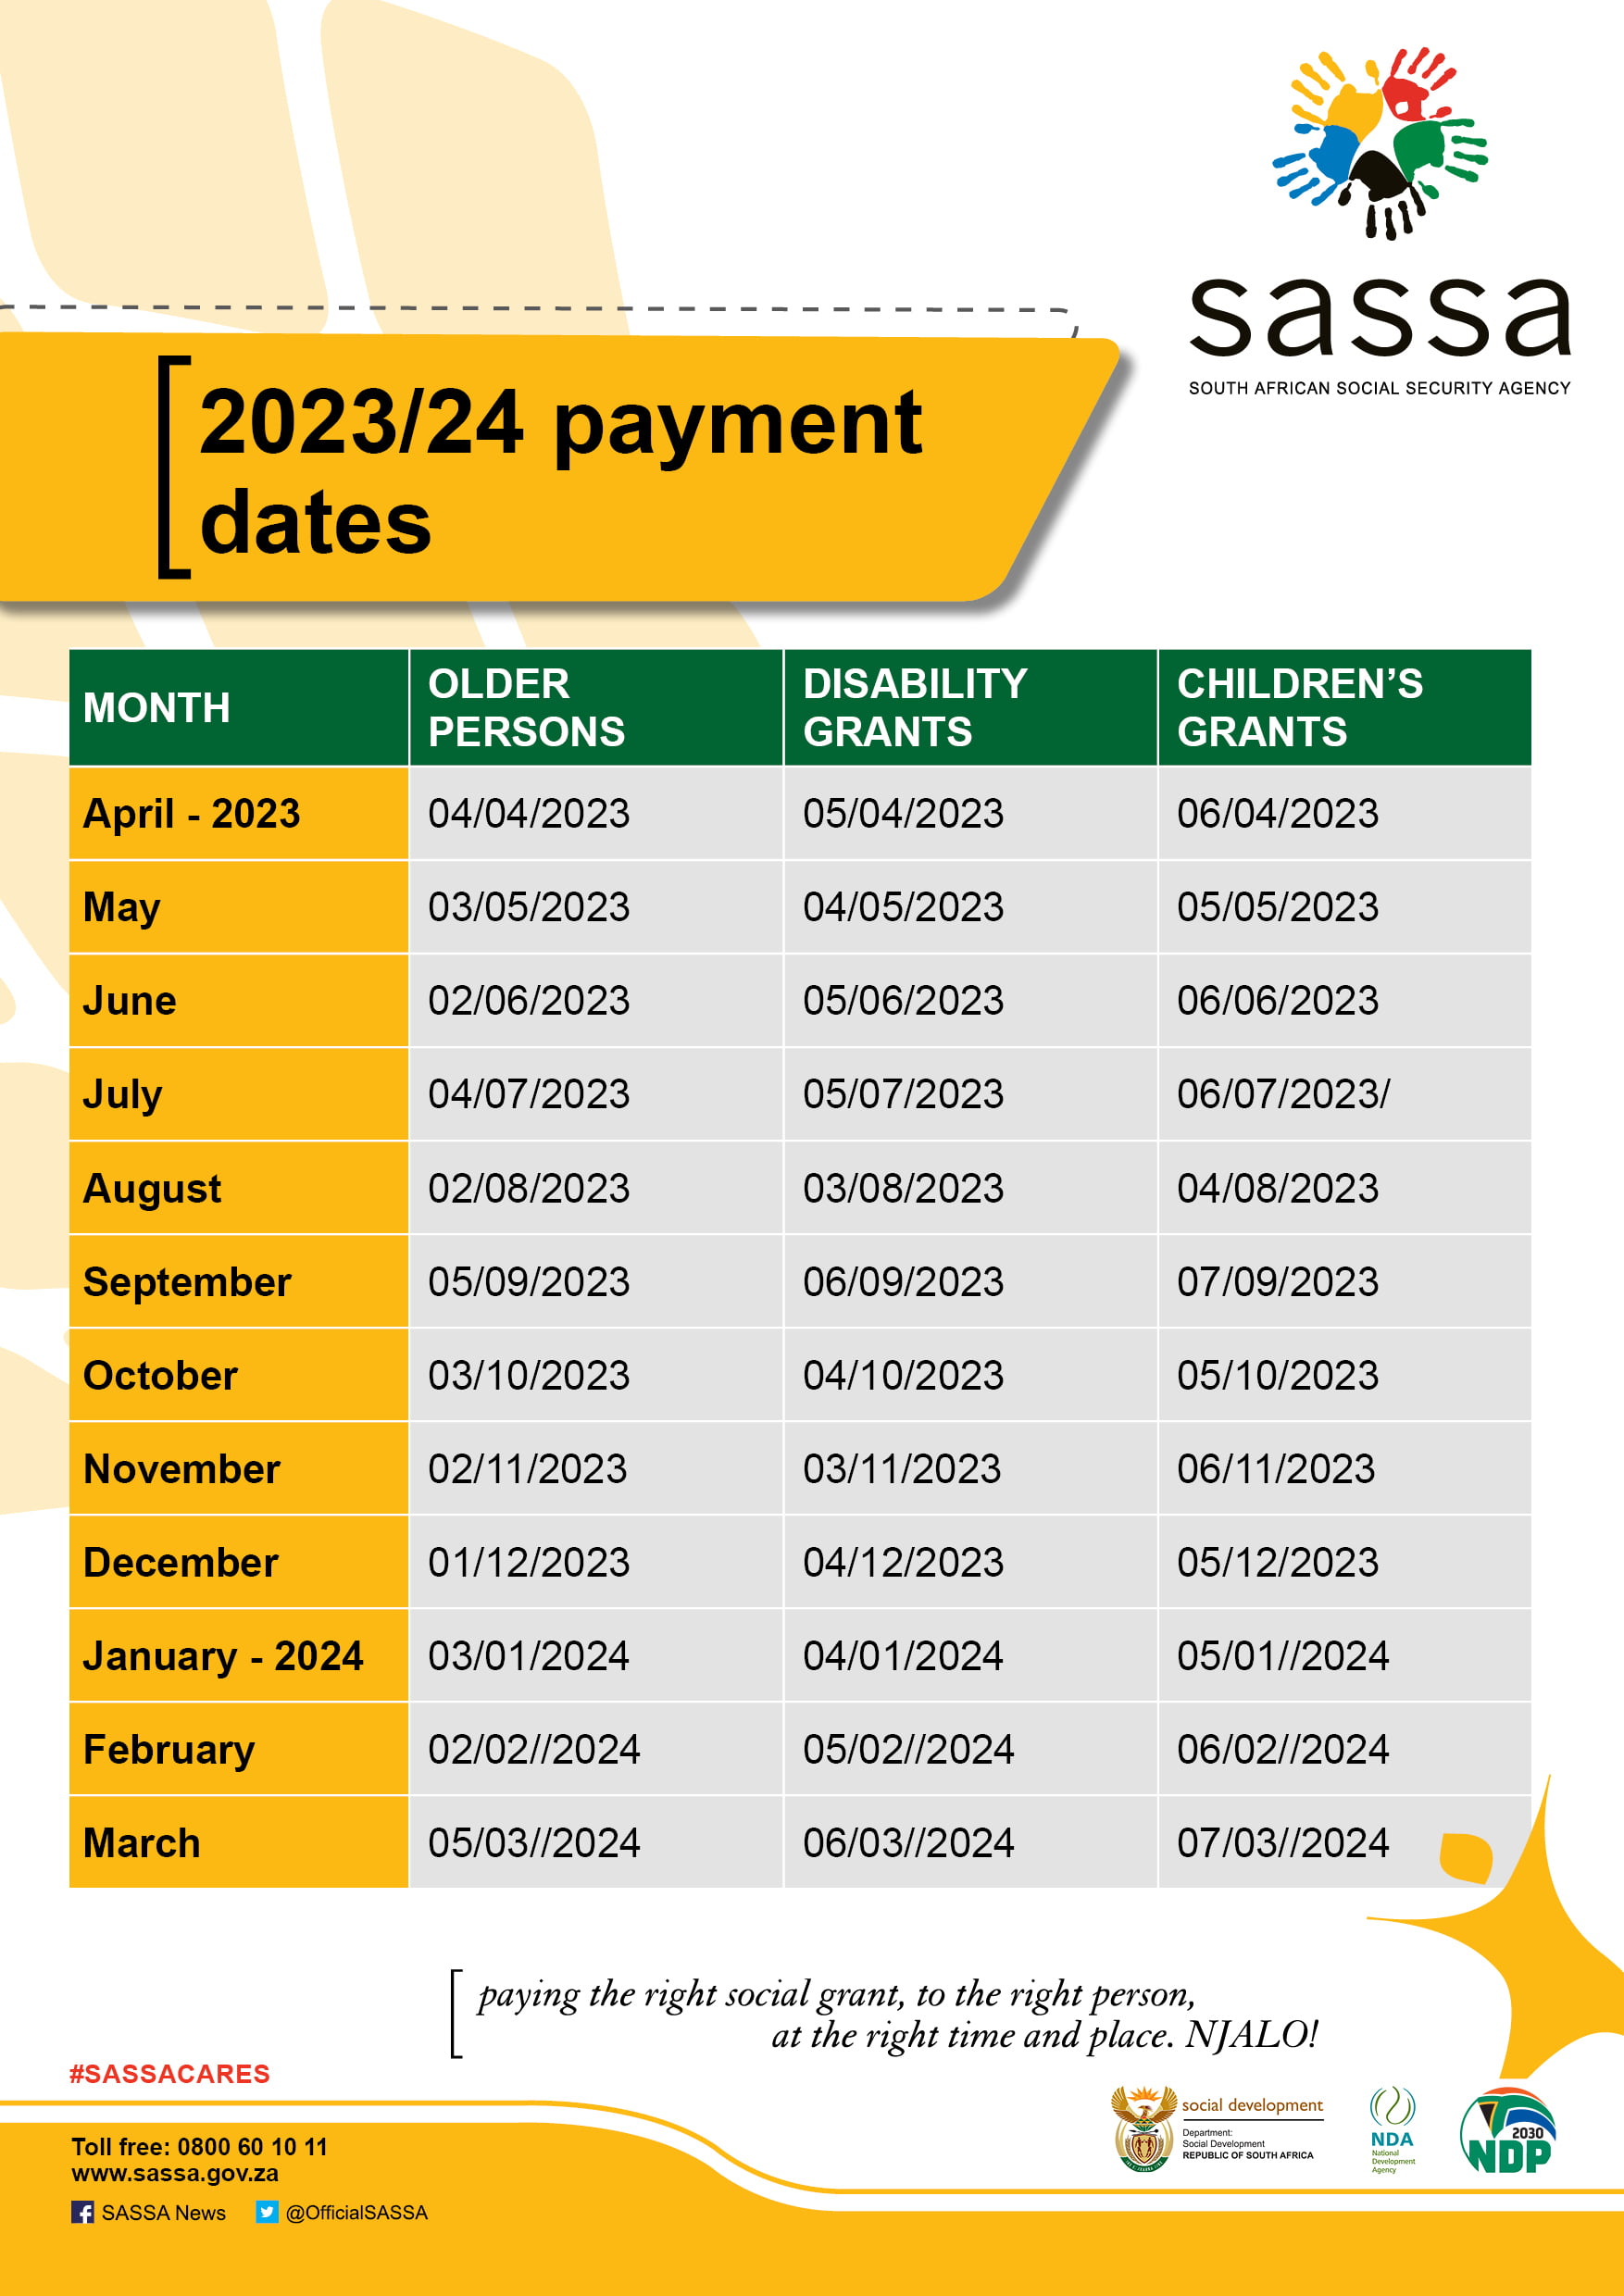 SASSA Payment Dates for 2023/2024